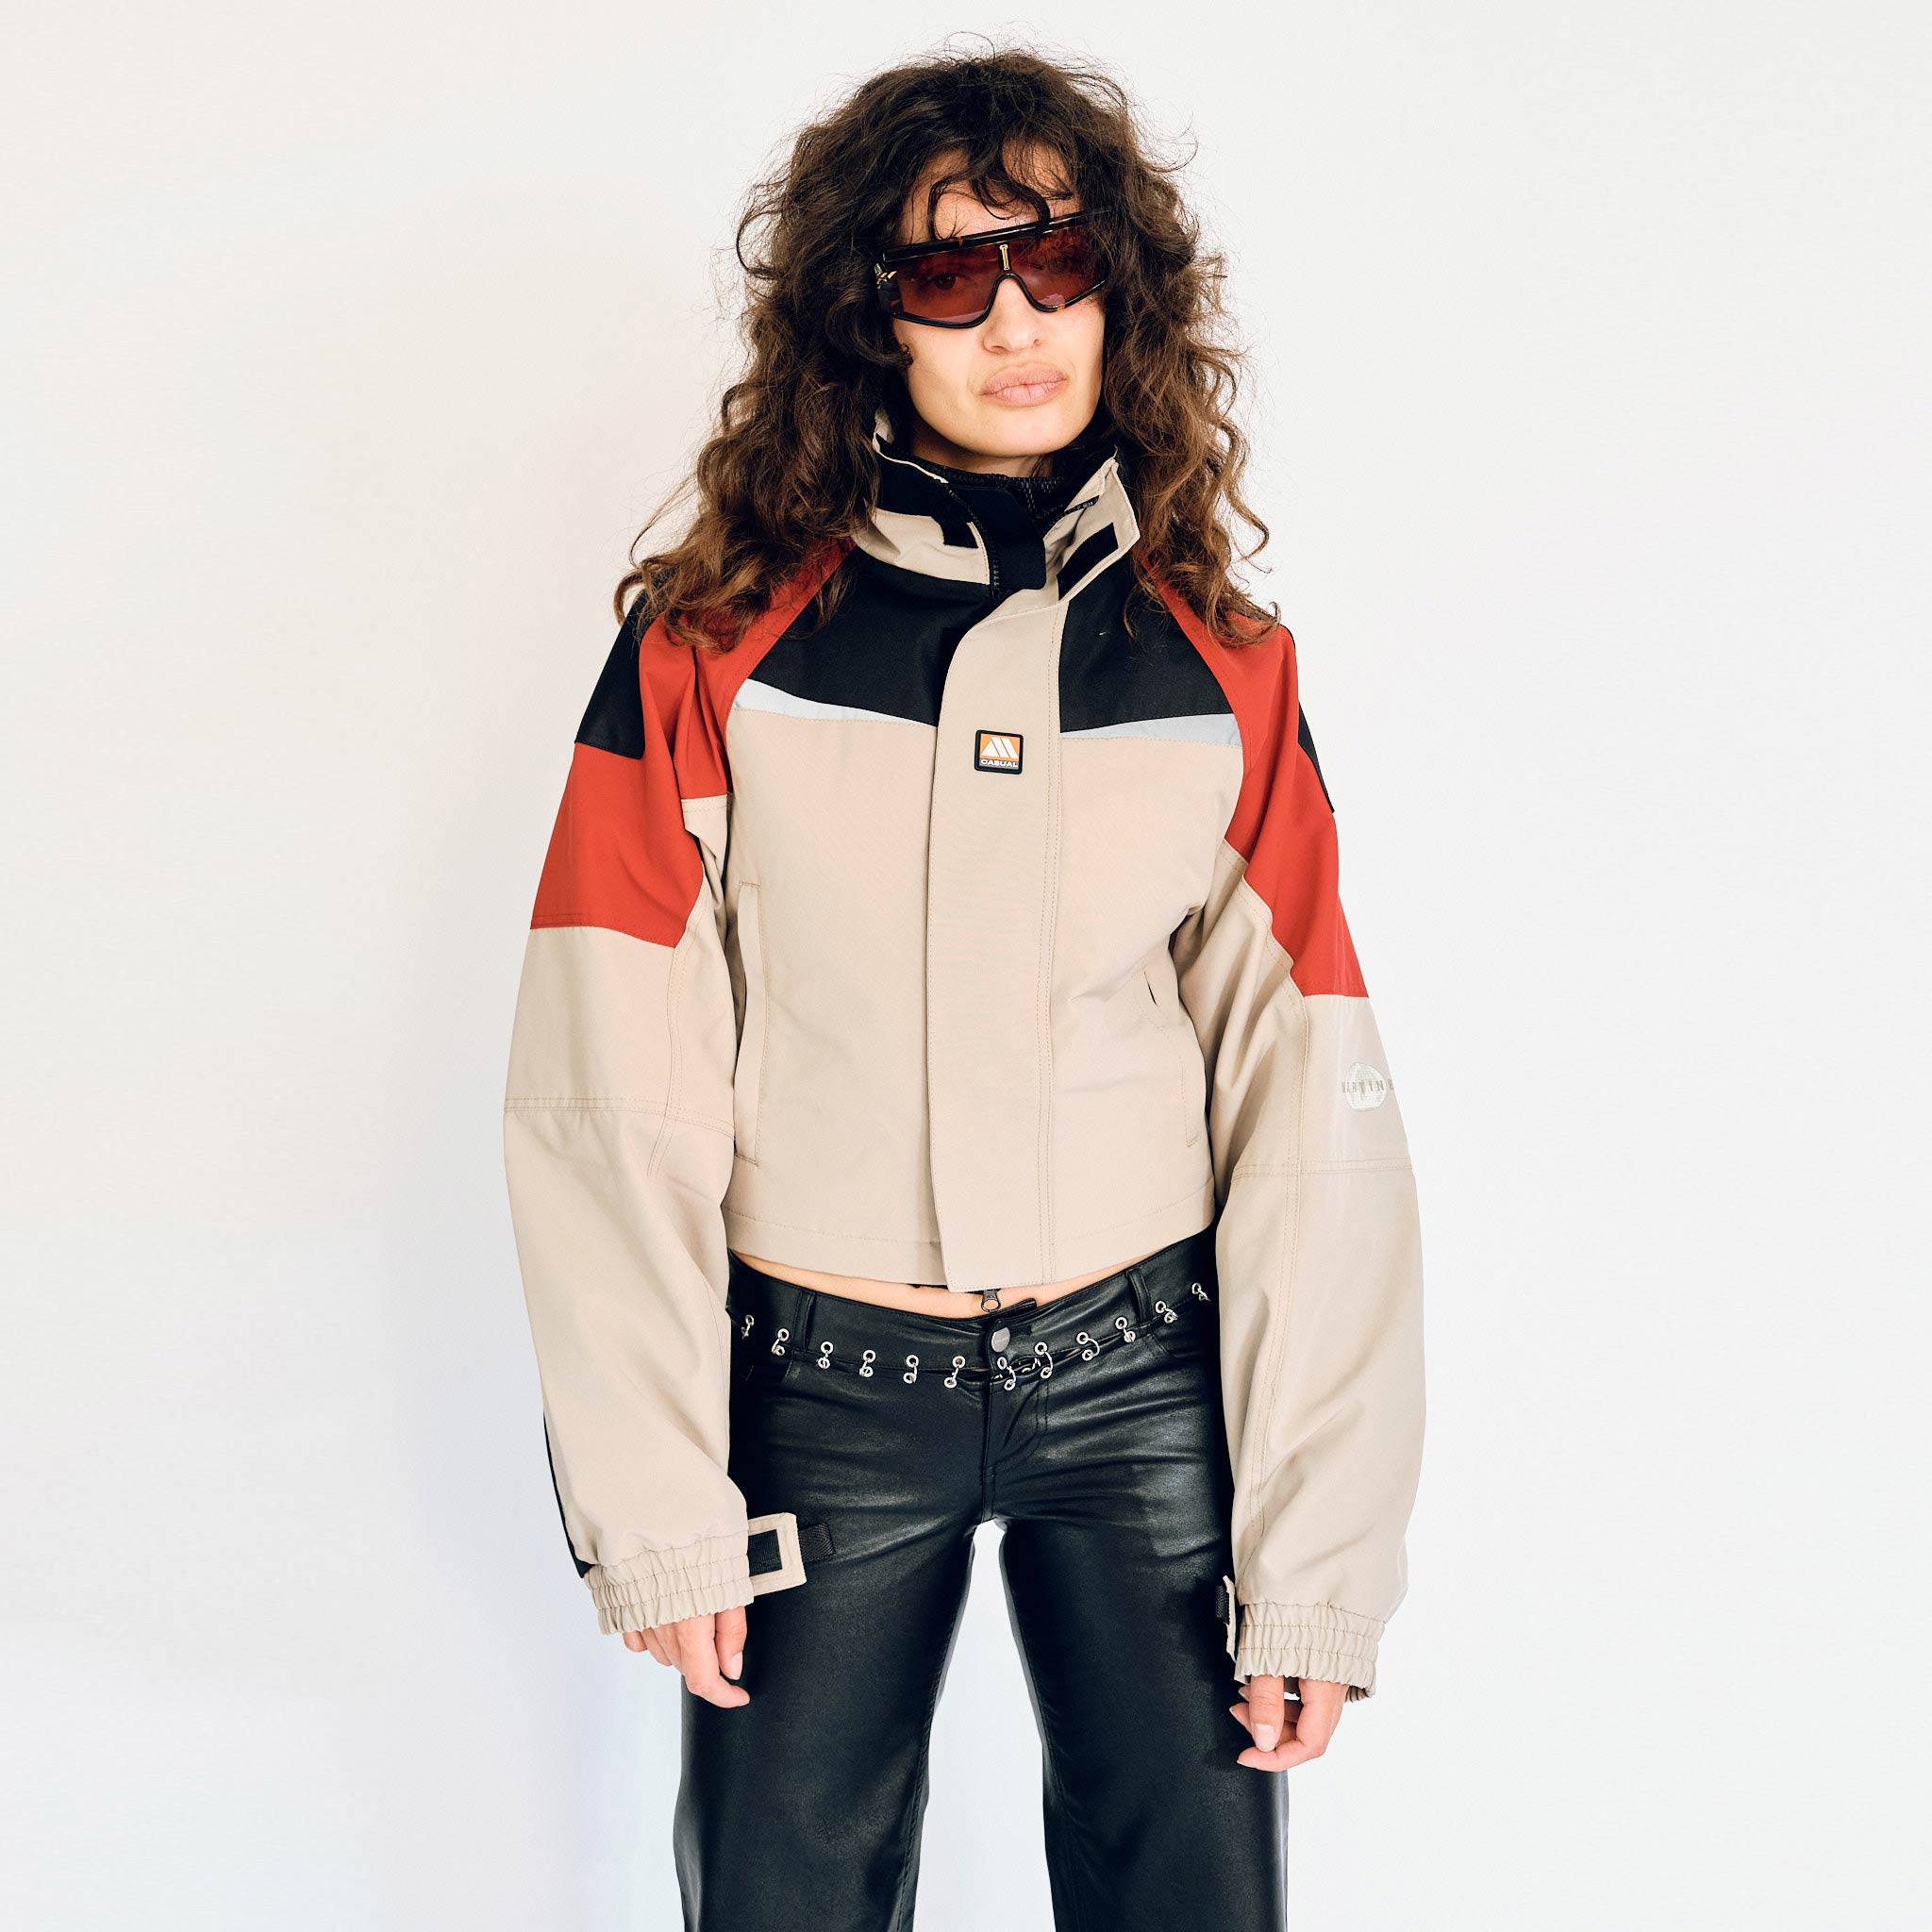 A model wears the Martine Rose Shrunken Sports Jacket with beige body and red and black color blocking on the shoulders.